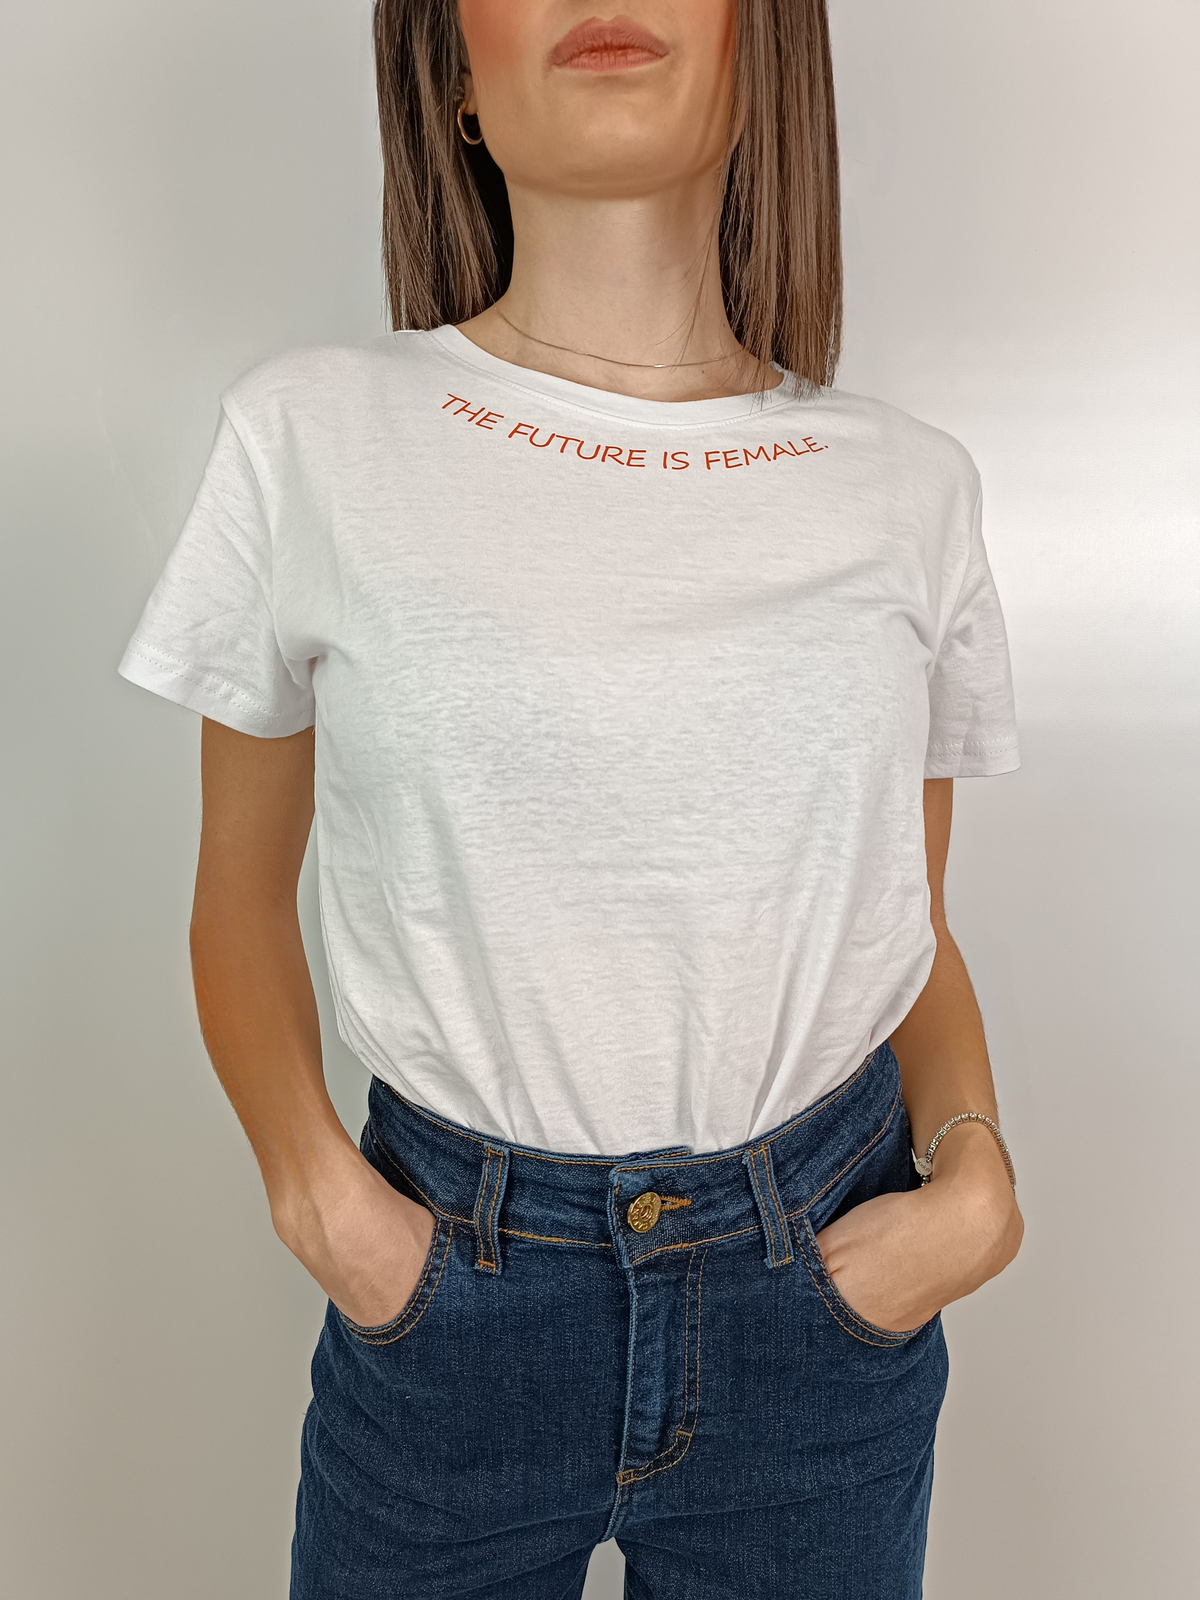 T shirt "the future is female"